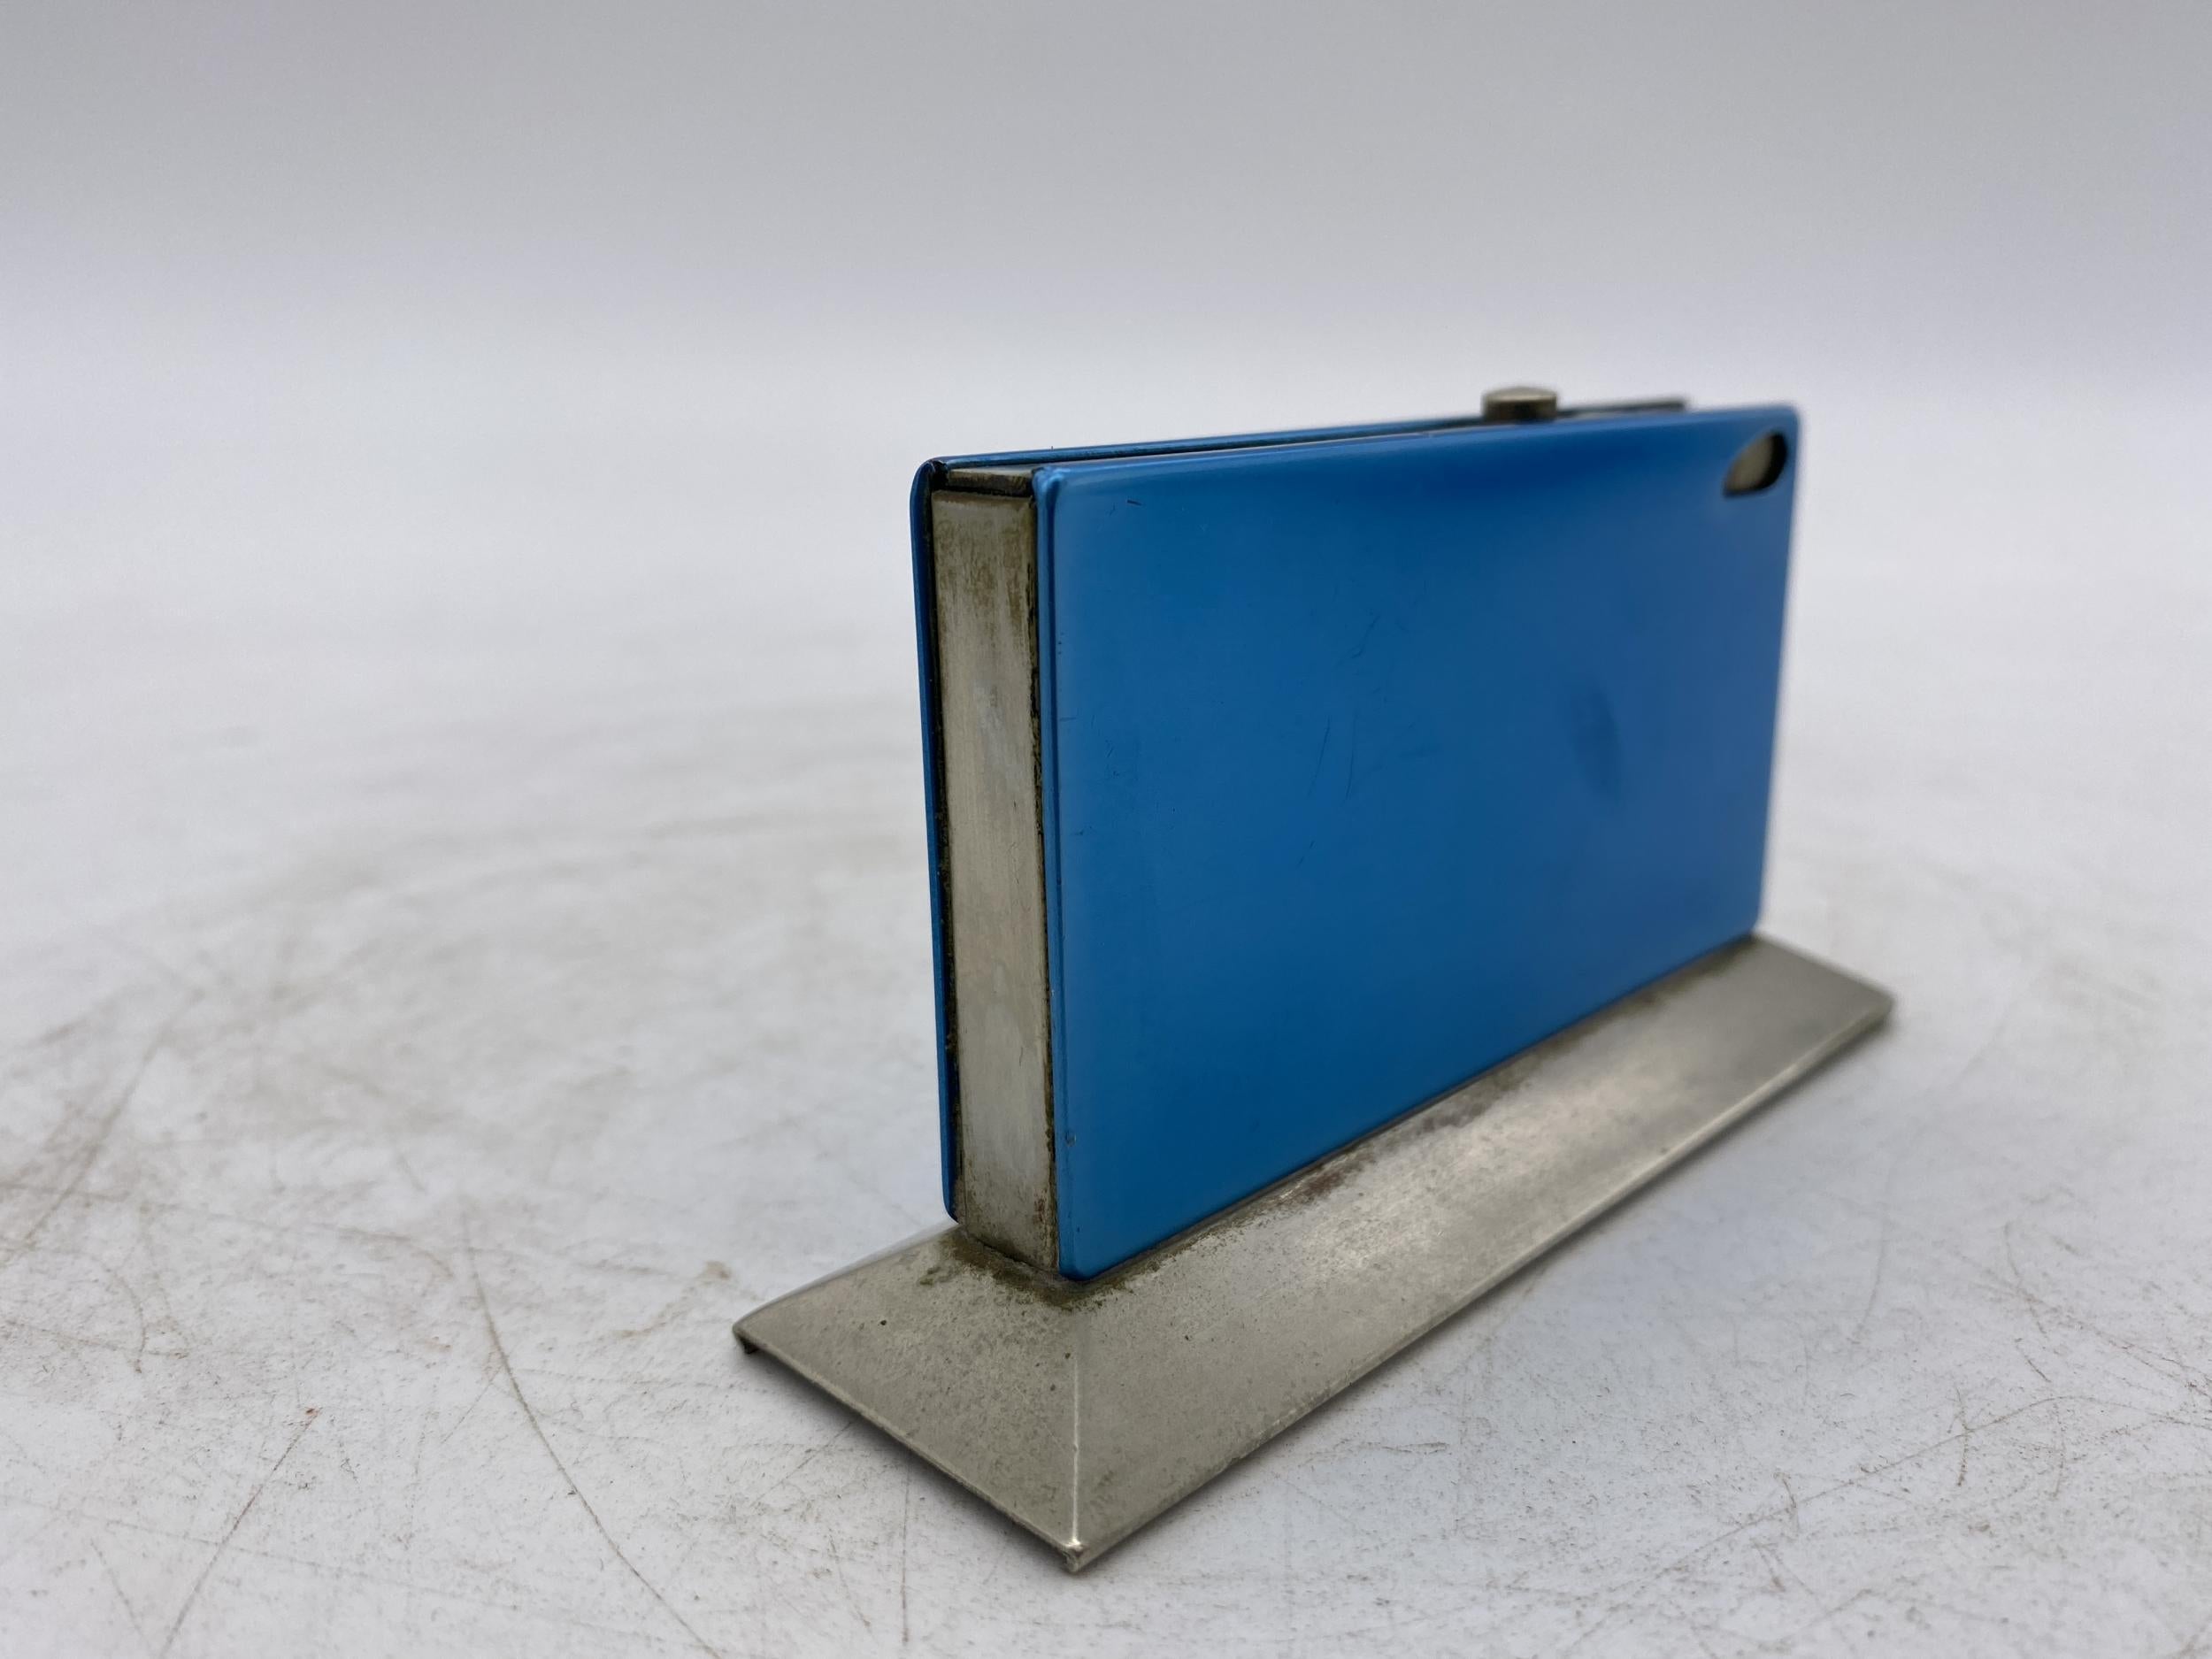 Original 1960s blue anodized aluminum table lighter with auto pop-button mechanism, made in Germany. Marked: 